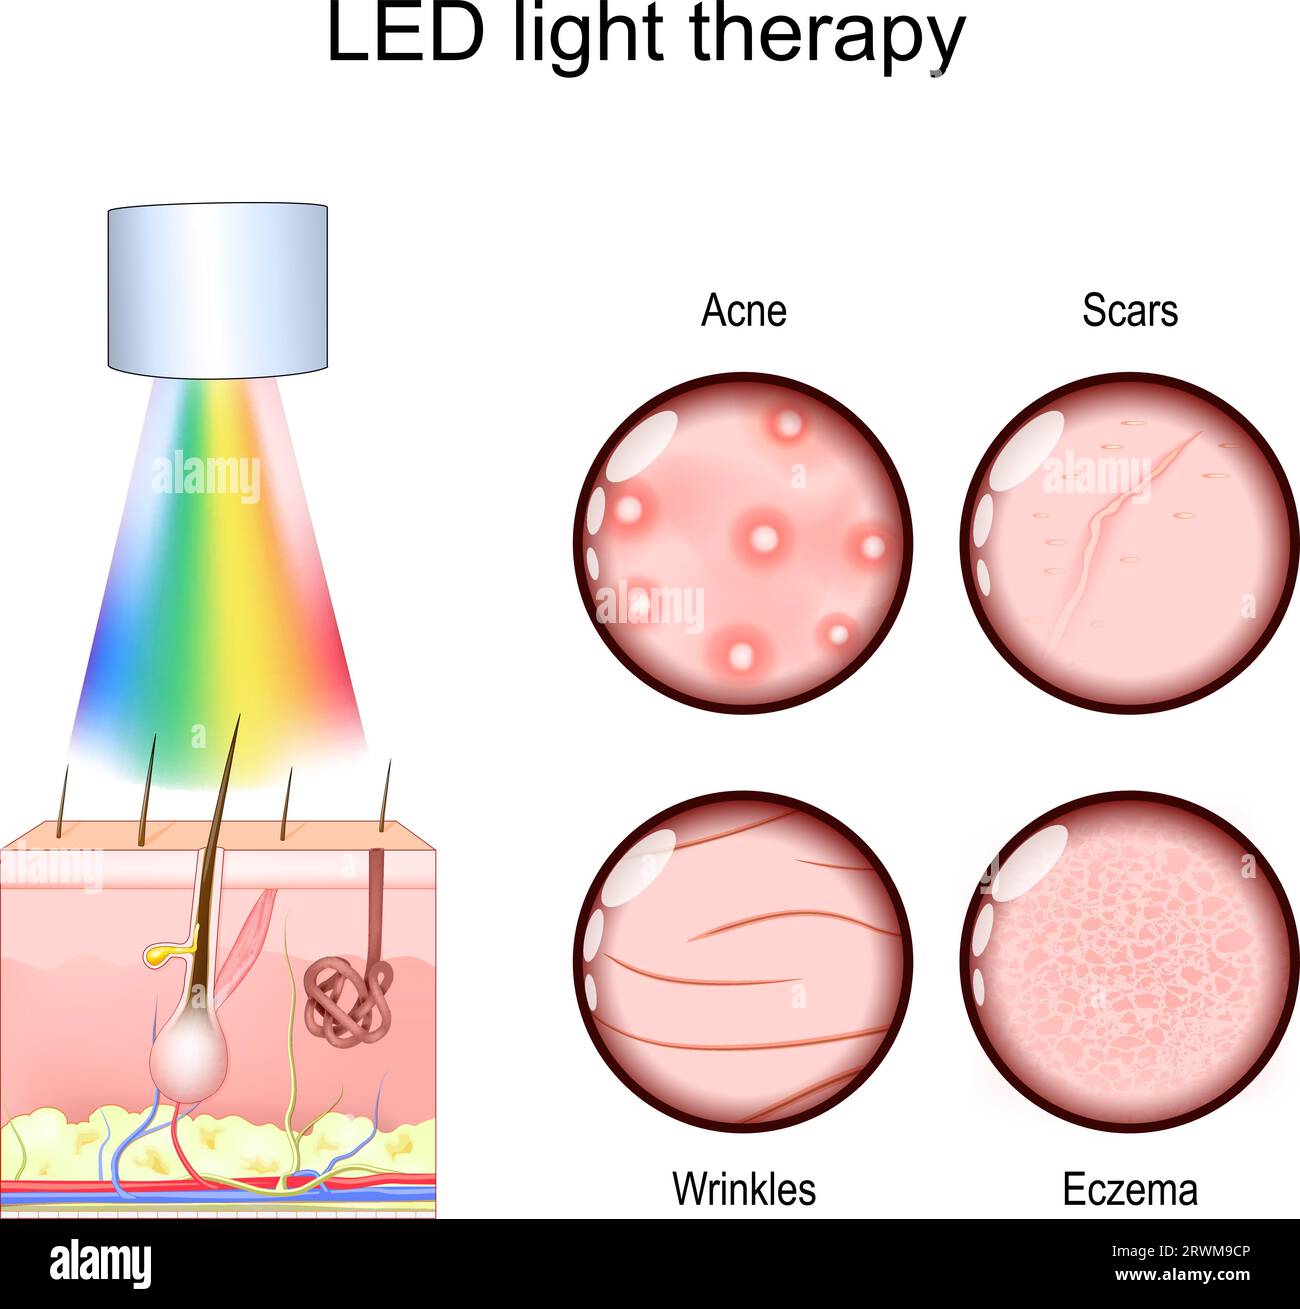 LED light therapy for skin-related issues, like Acne treatment, Scars, and Wrinkles reduction, and Eczema management. Phototherapy for Skin rejuvenati Stock Vector